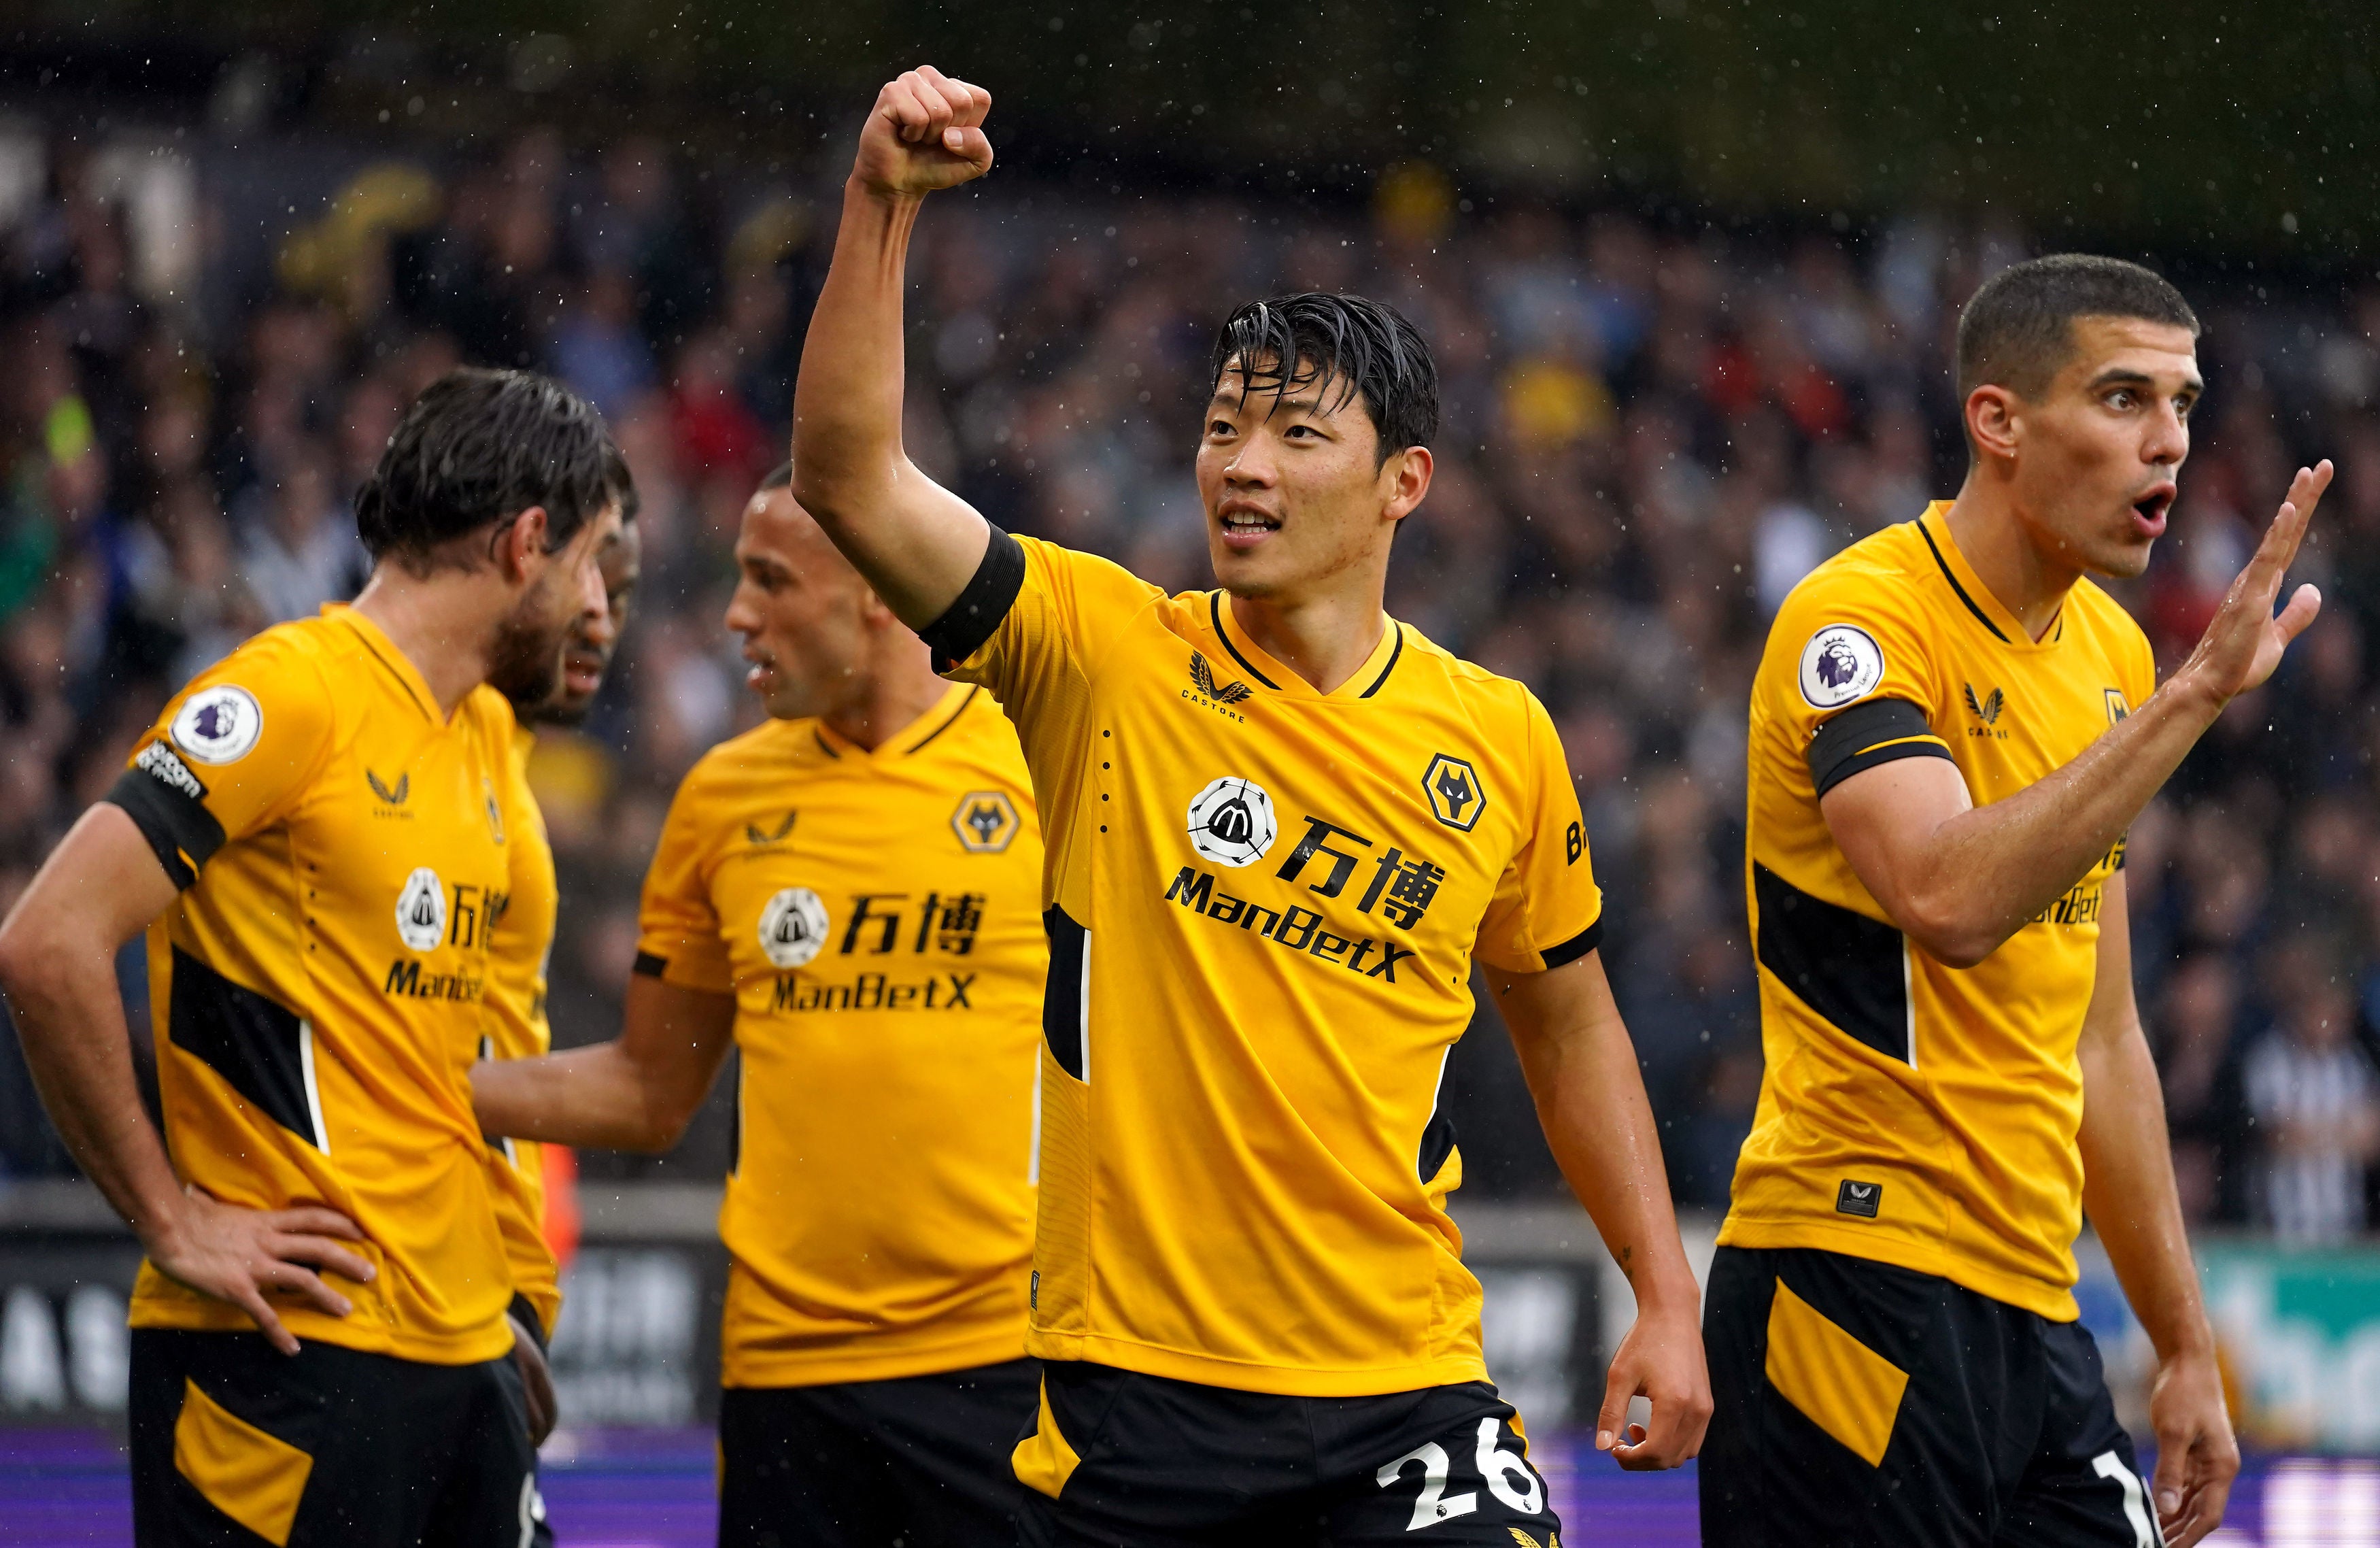 Wolves go to Aston Villa in the Premier League on Saturday